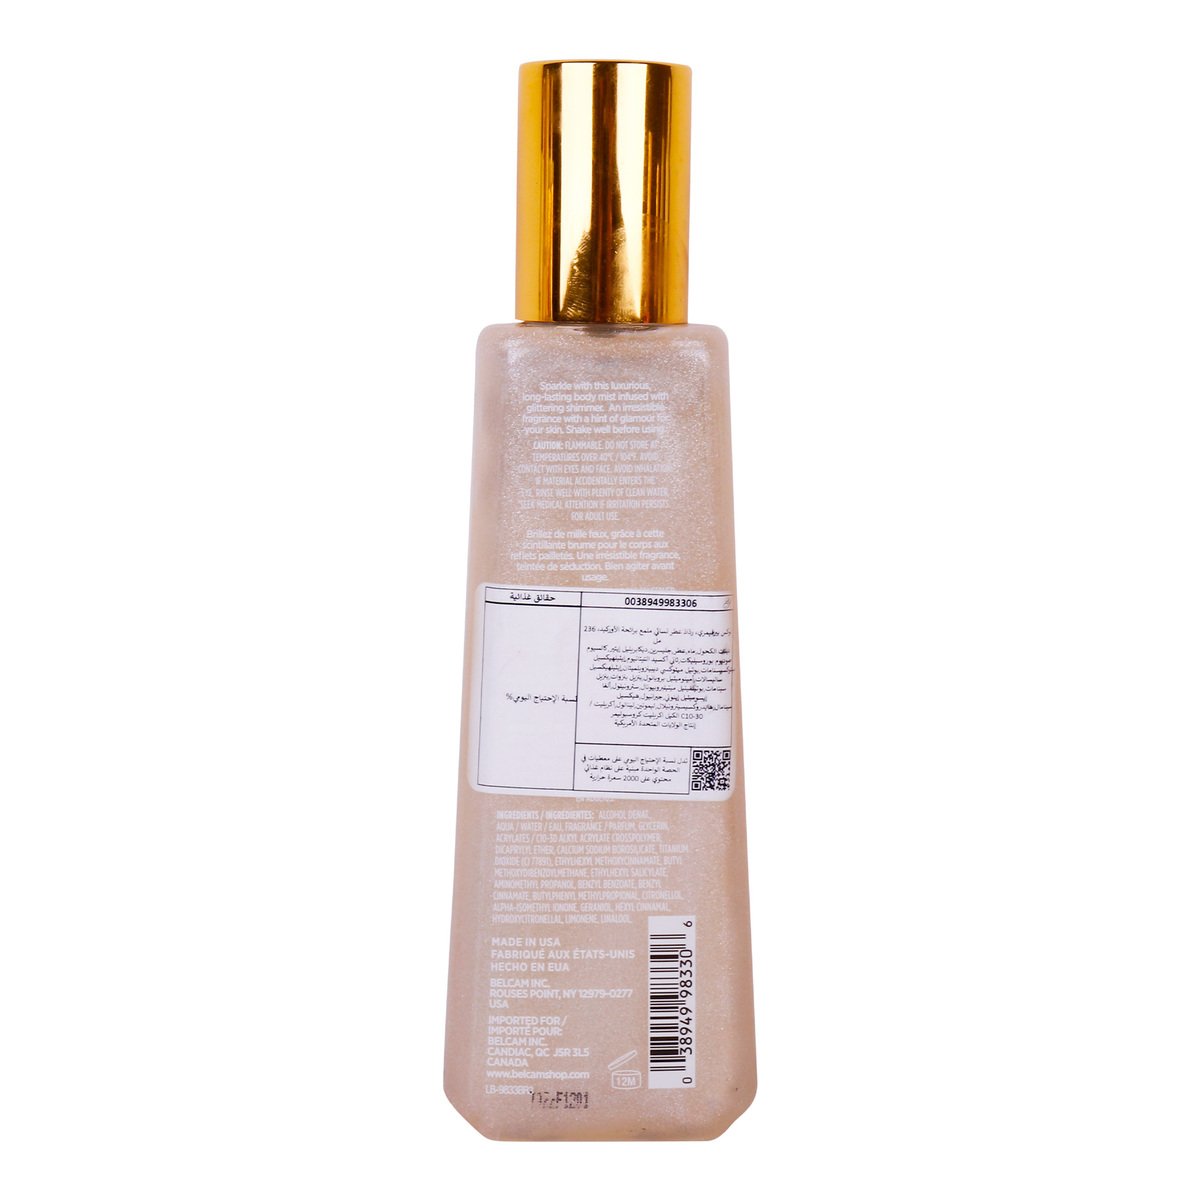 Luxe Perfumery Shimmer Mist Sugared Orchid 236ml